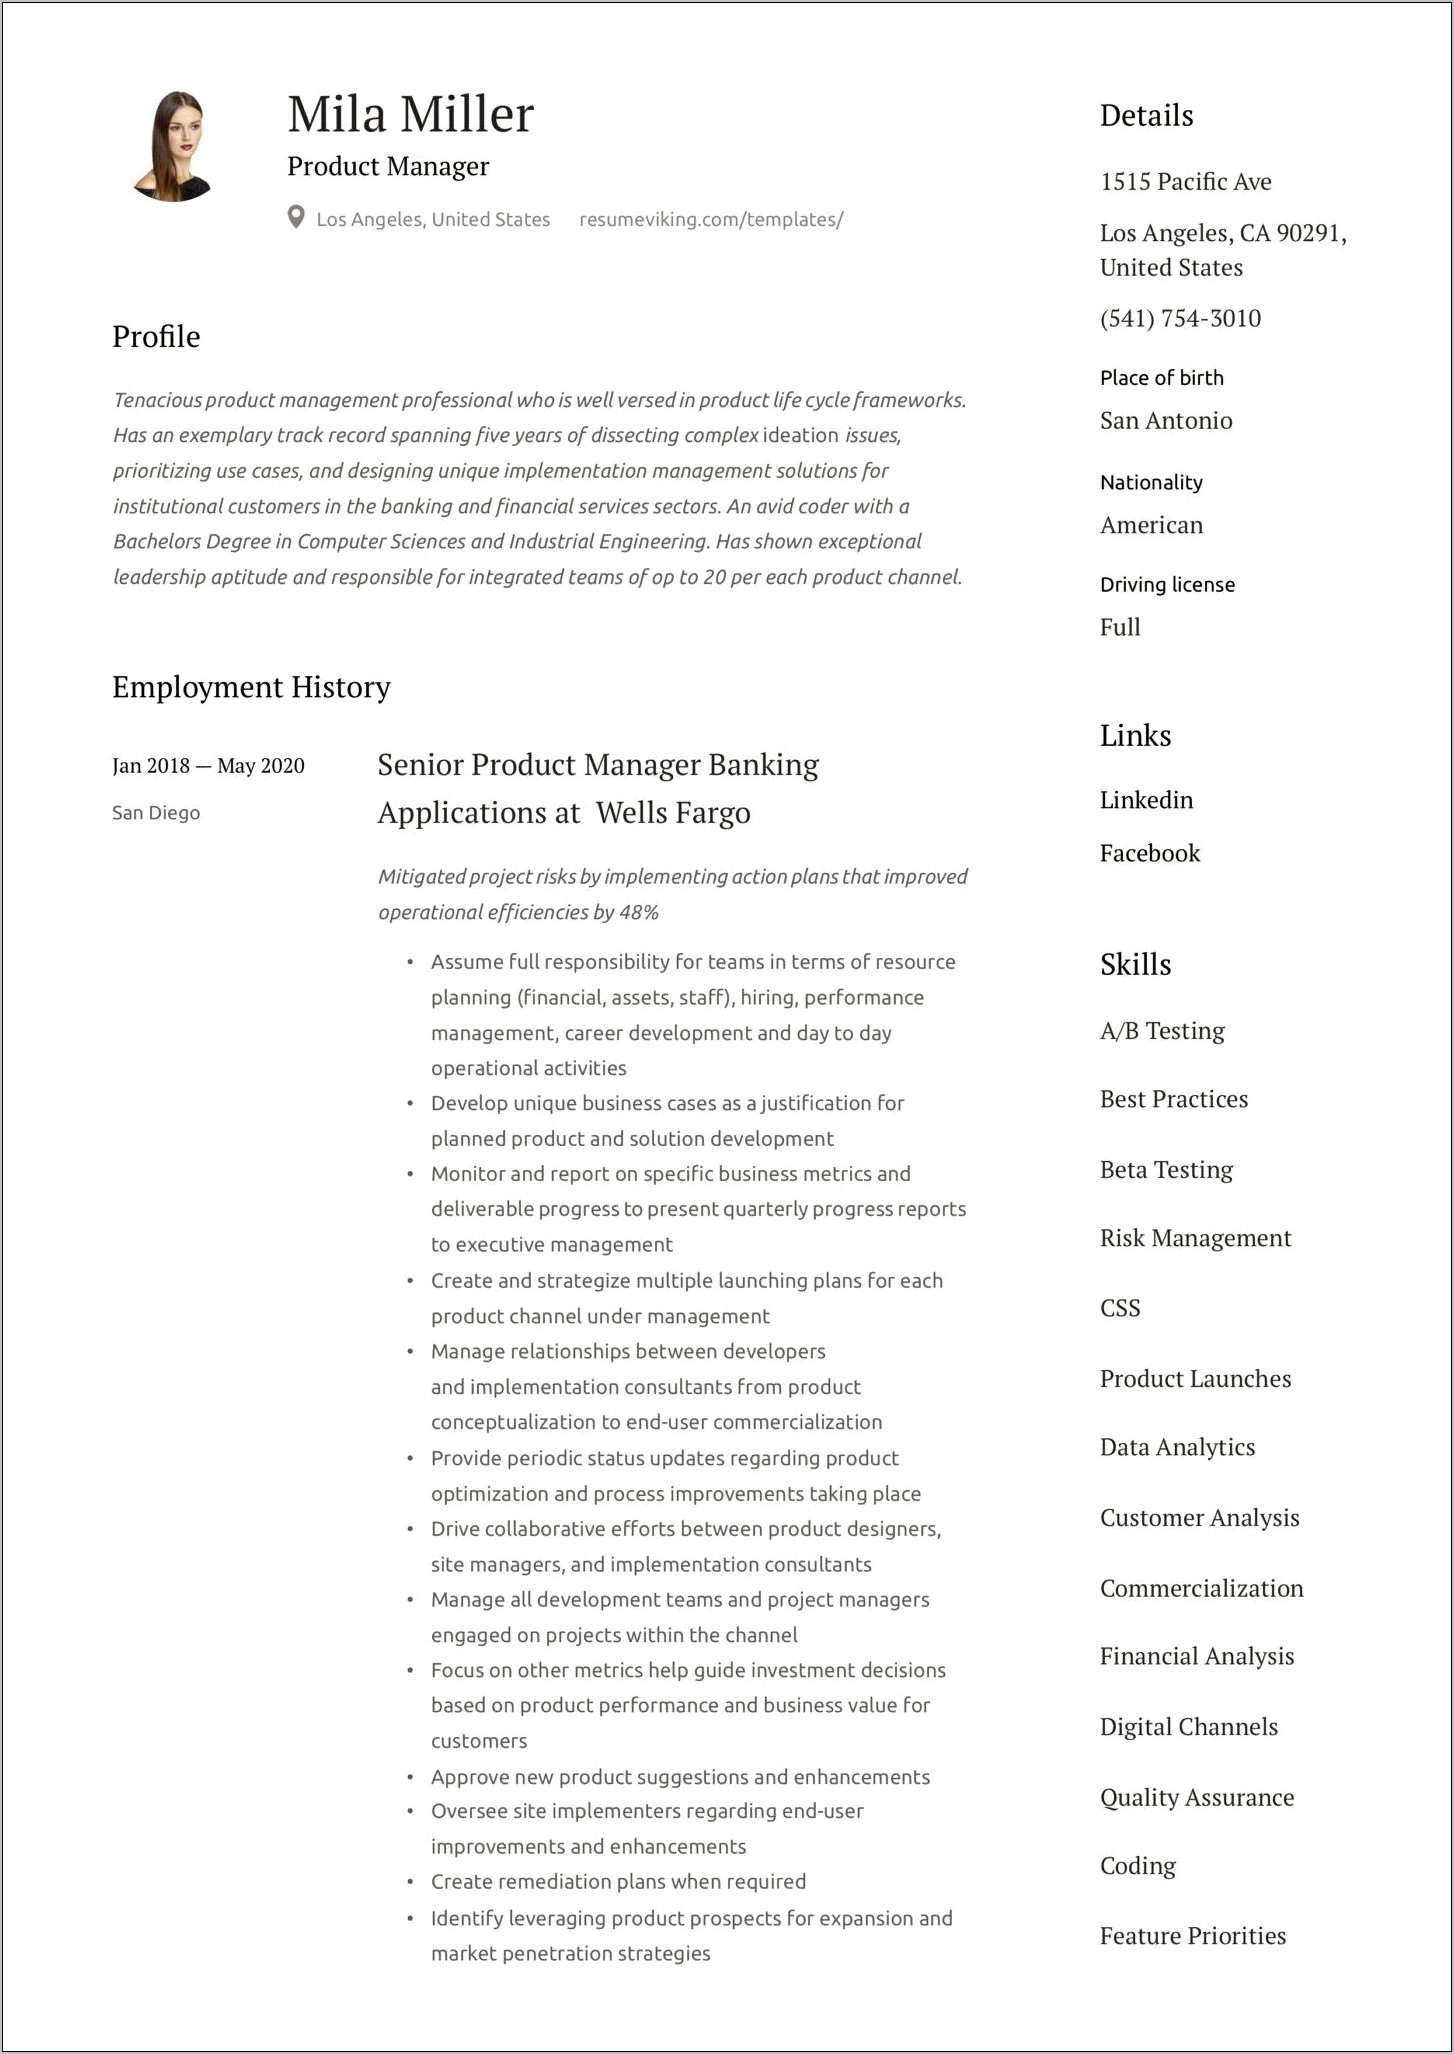 Technical Product Manager Resume Sample